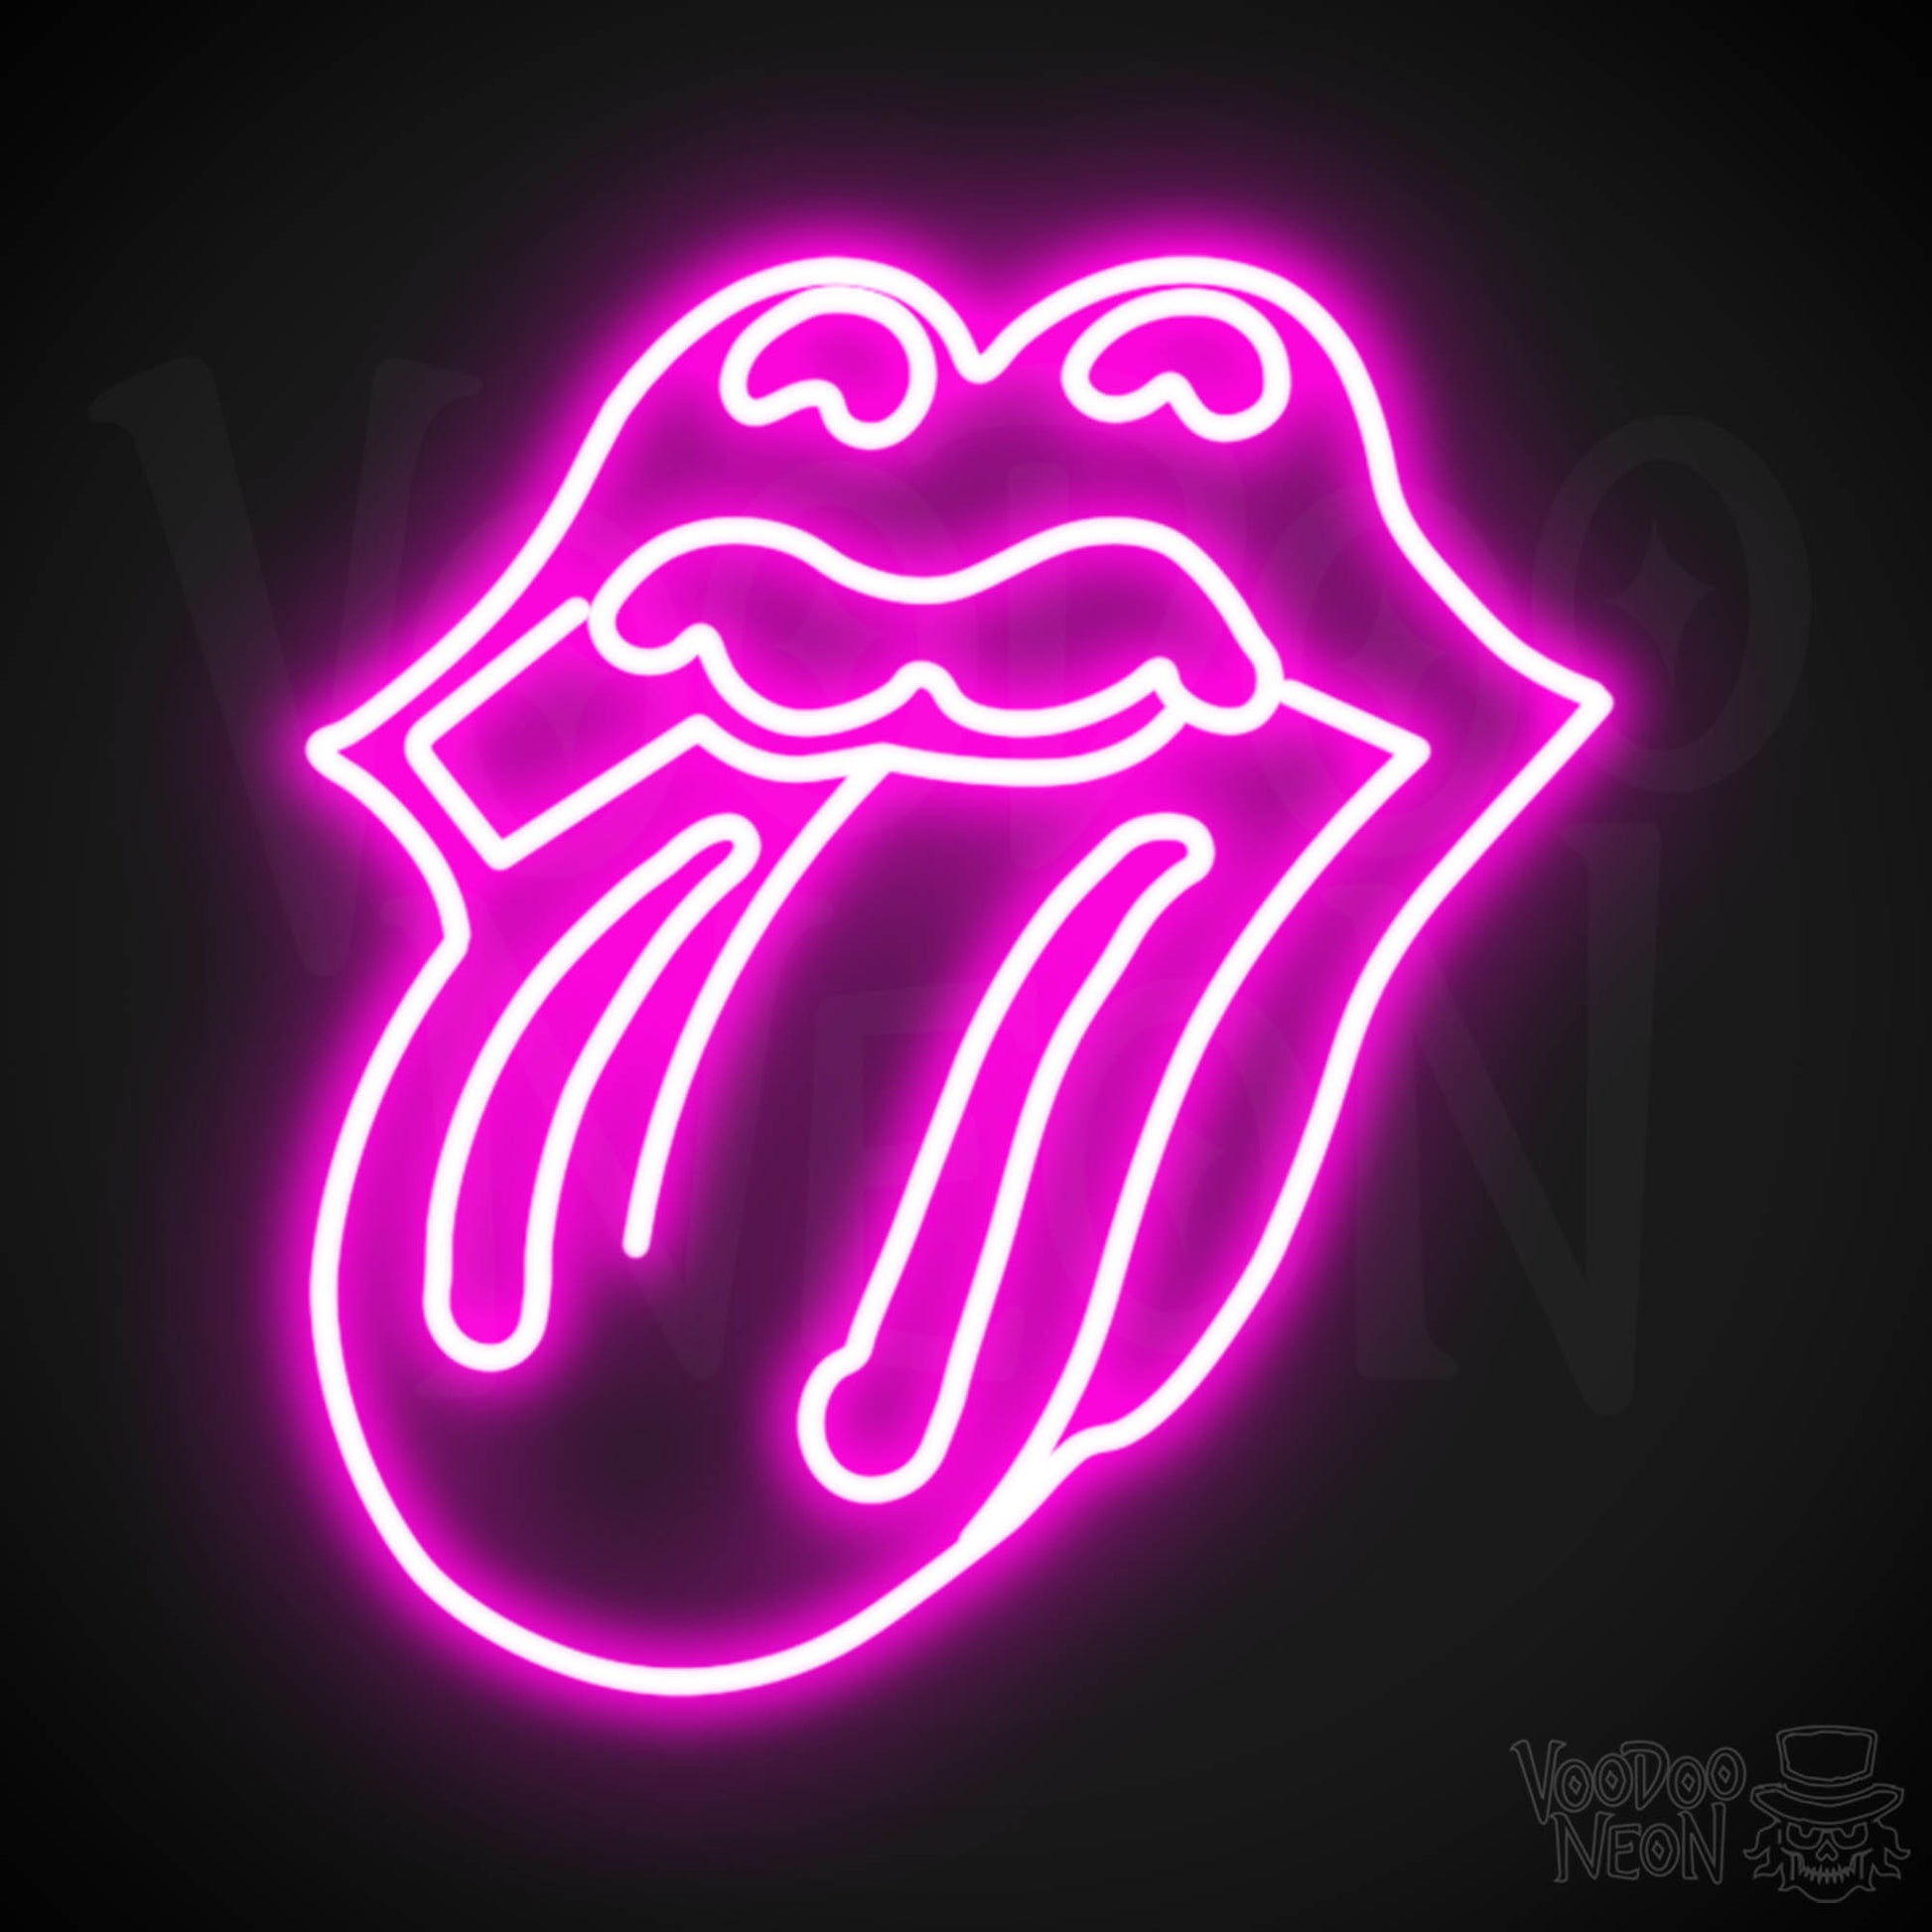 Rolling Stones Neon Sign - Rolling Stones Sign - Neon Rolling Stones Logo Wall Art - Color Pink